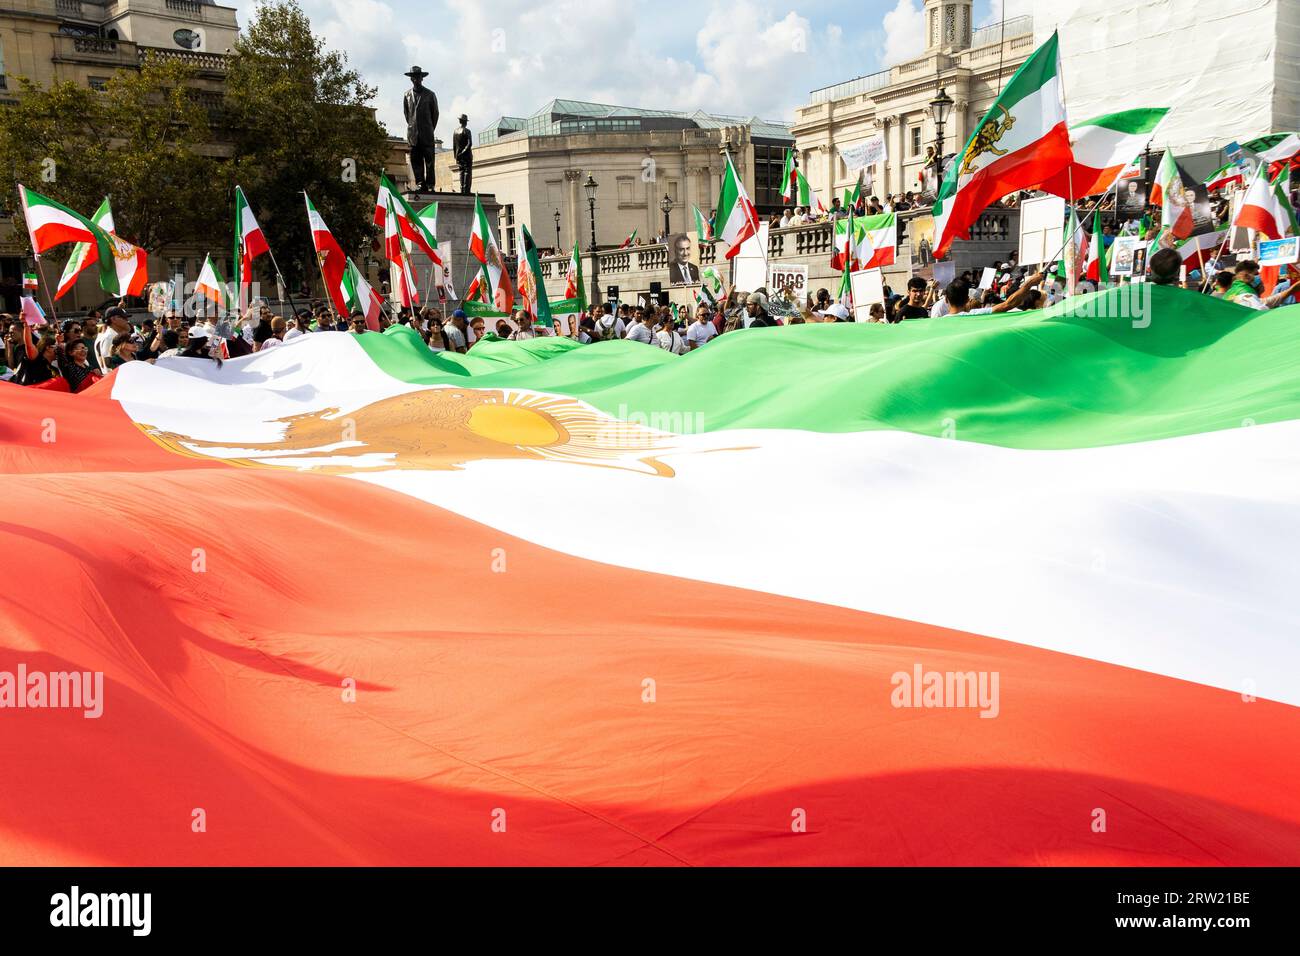 London, UK. 16th Sep, 2023. On the first anniversary of the death of Mahsa Amini, members of the British-Iranian community congregated in Central London to pay tribute. Displayed prominently were images of Mahsa alongside those of Crown Prince Reza Pahlavi and the historic Shir-o-Khorshid flag, an emblem representing Iran. The gathering marked a sombre occasion, honouring not only Mahsa but the broader Iranian diaspora's quest for justice and freedom. Credit: Sinai Noor/Alamy Live News Stock Photo